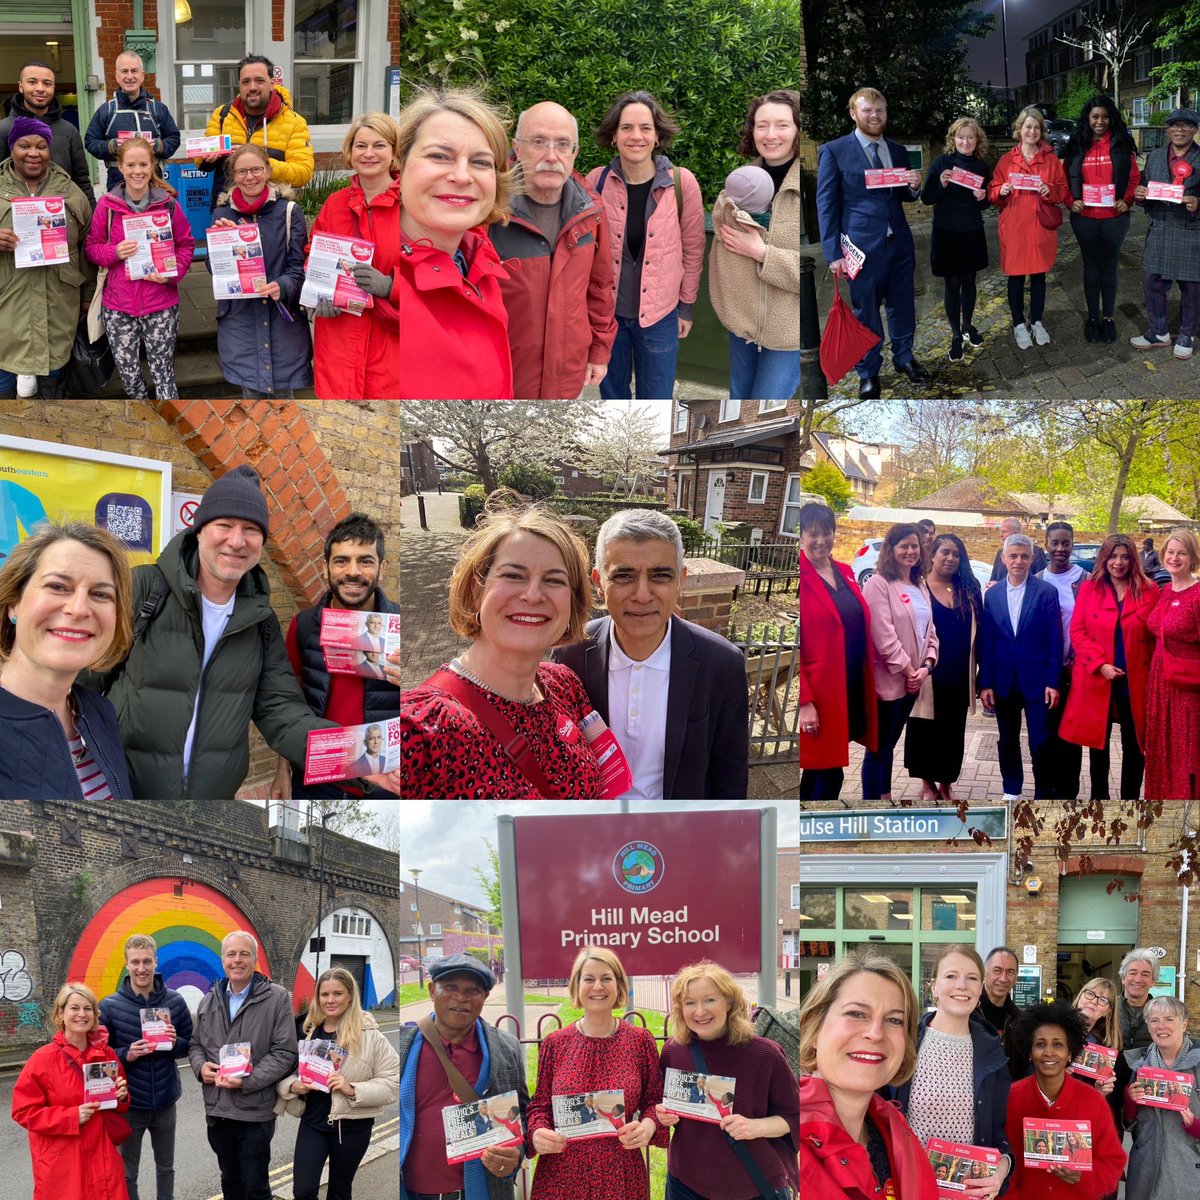 Thank you to every @DaWNLabour member who has delivered leaflets, knocked on doors, telephoned voters & helped to get the vote out for @SadiqKhan @LabourMarina & @LondonLabour #LabourDoorstep 🌹🌹🌹